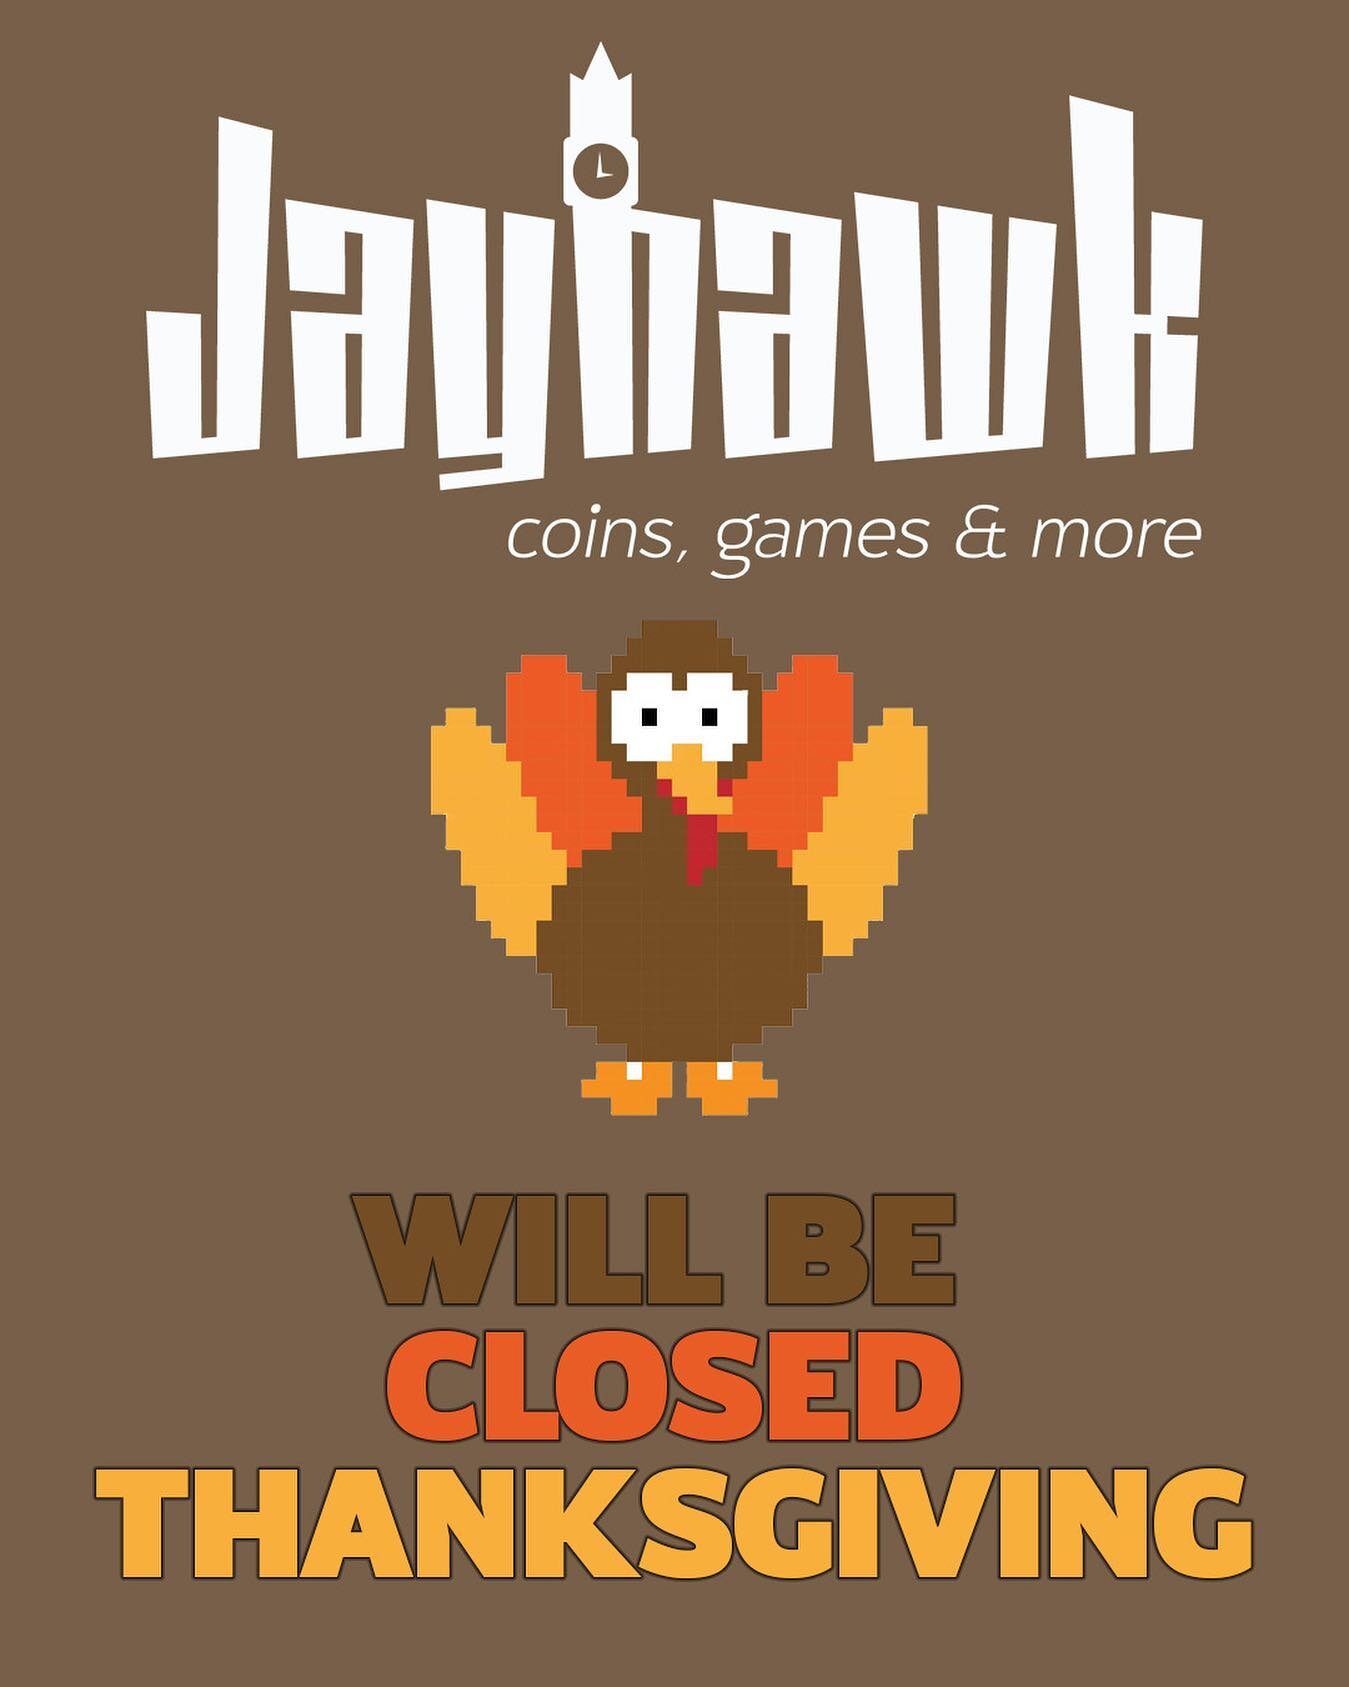 Thanksgiving is here almost here! We are so thankful for everyone who has supported Jayhawk Coins, Games &amp; More! We are so happy to be apart of the Fleming Place community! Here is a friendly reminder will be closed this Thursday!